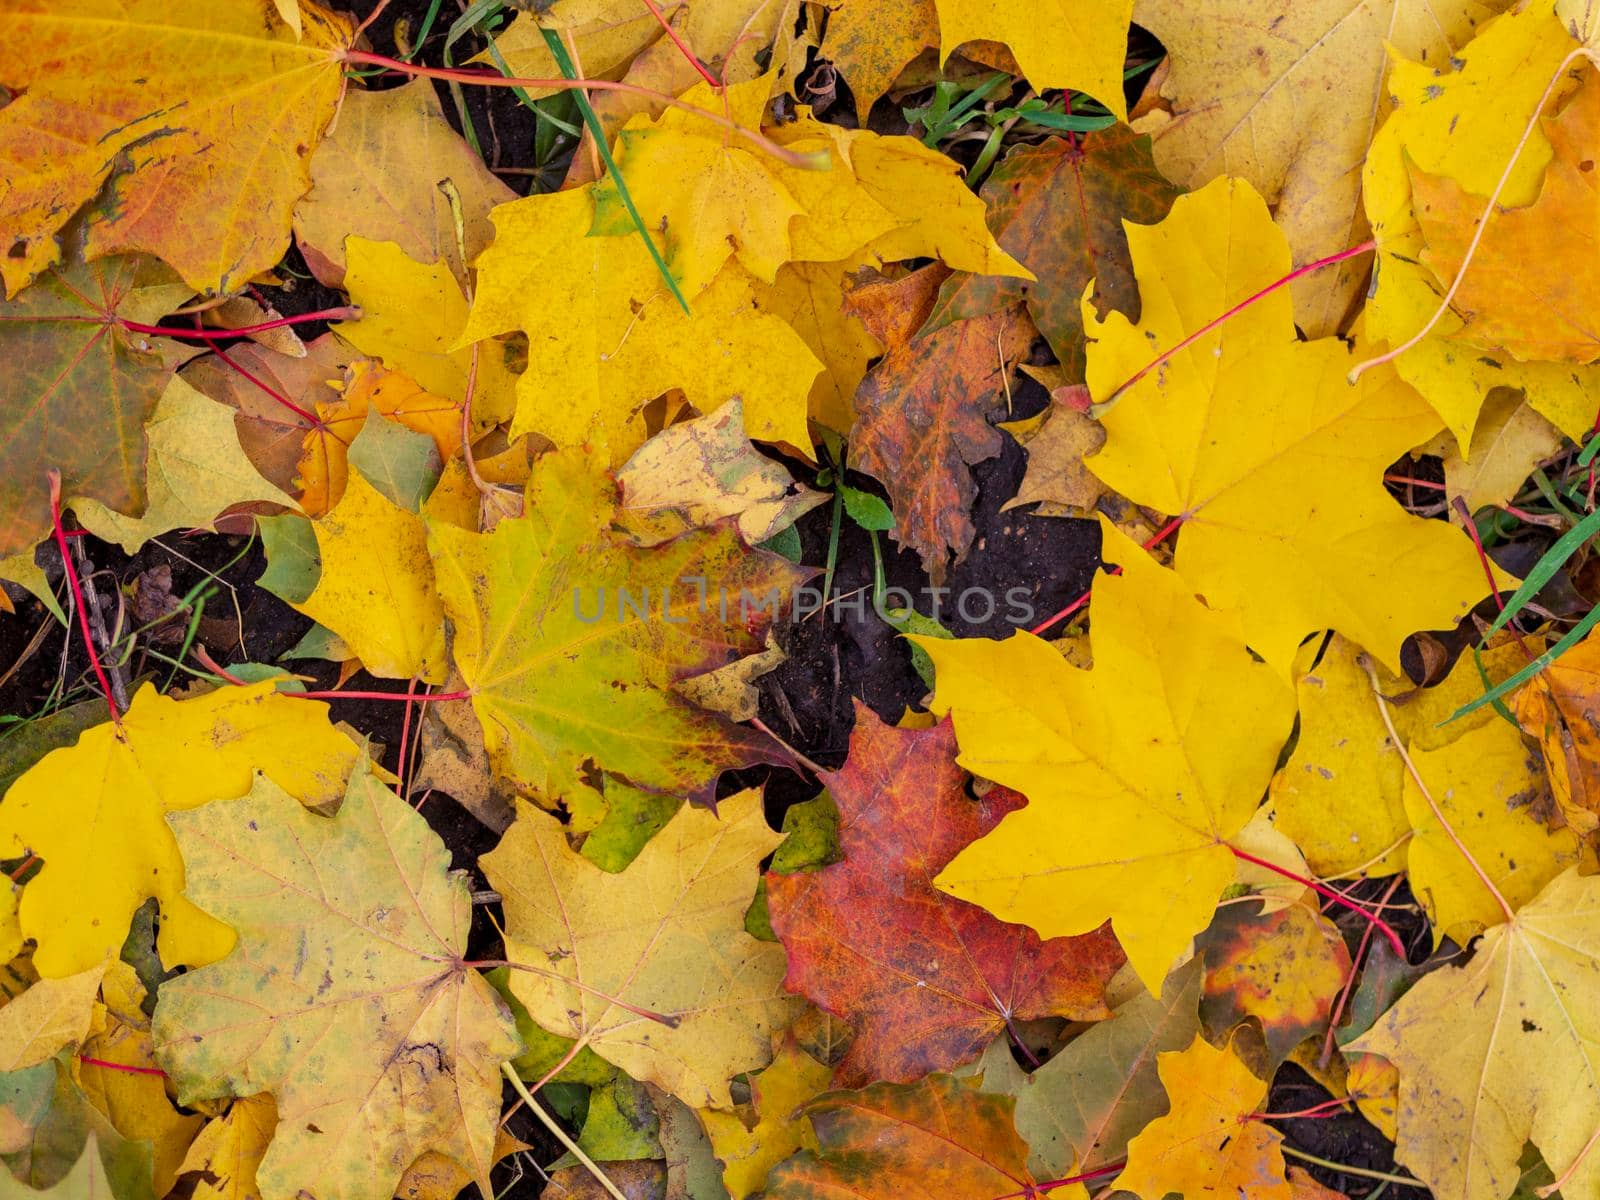 Colorful and bright background made of fallen autumn leaves by Andre1ns